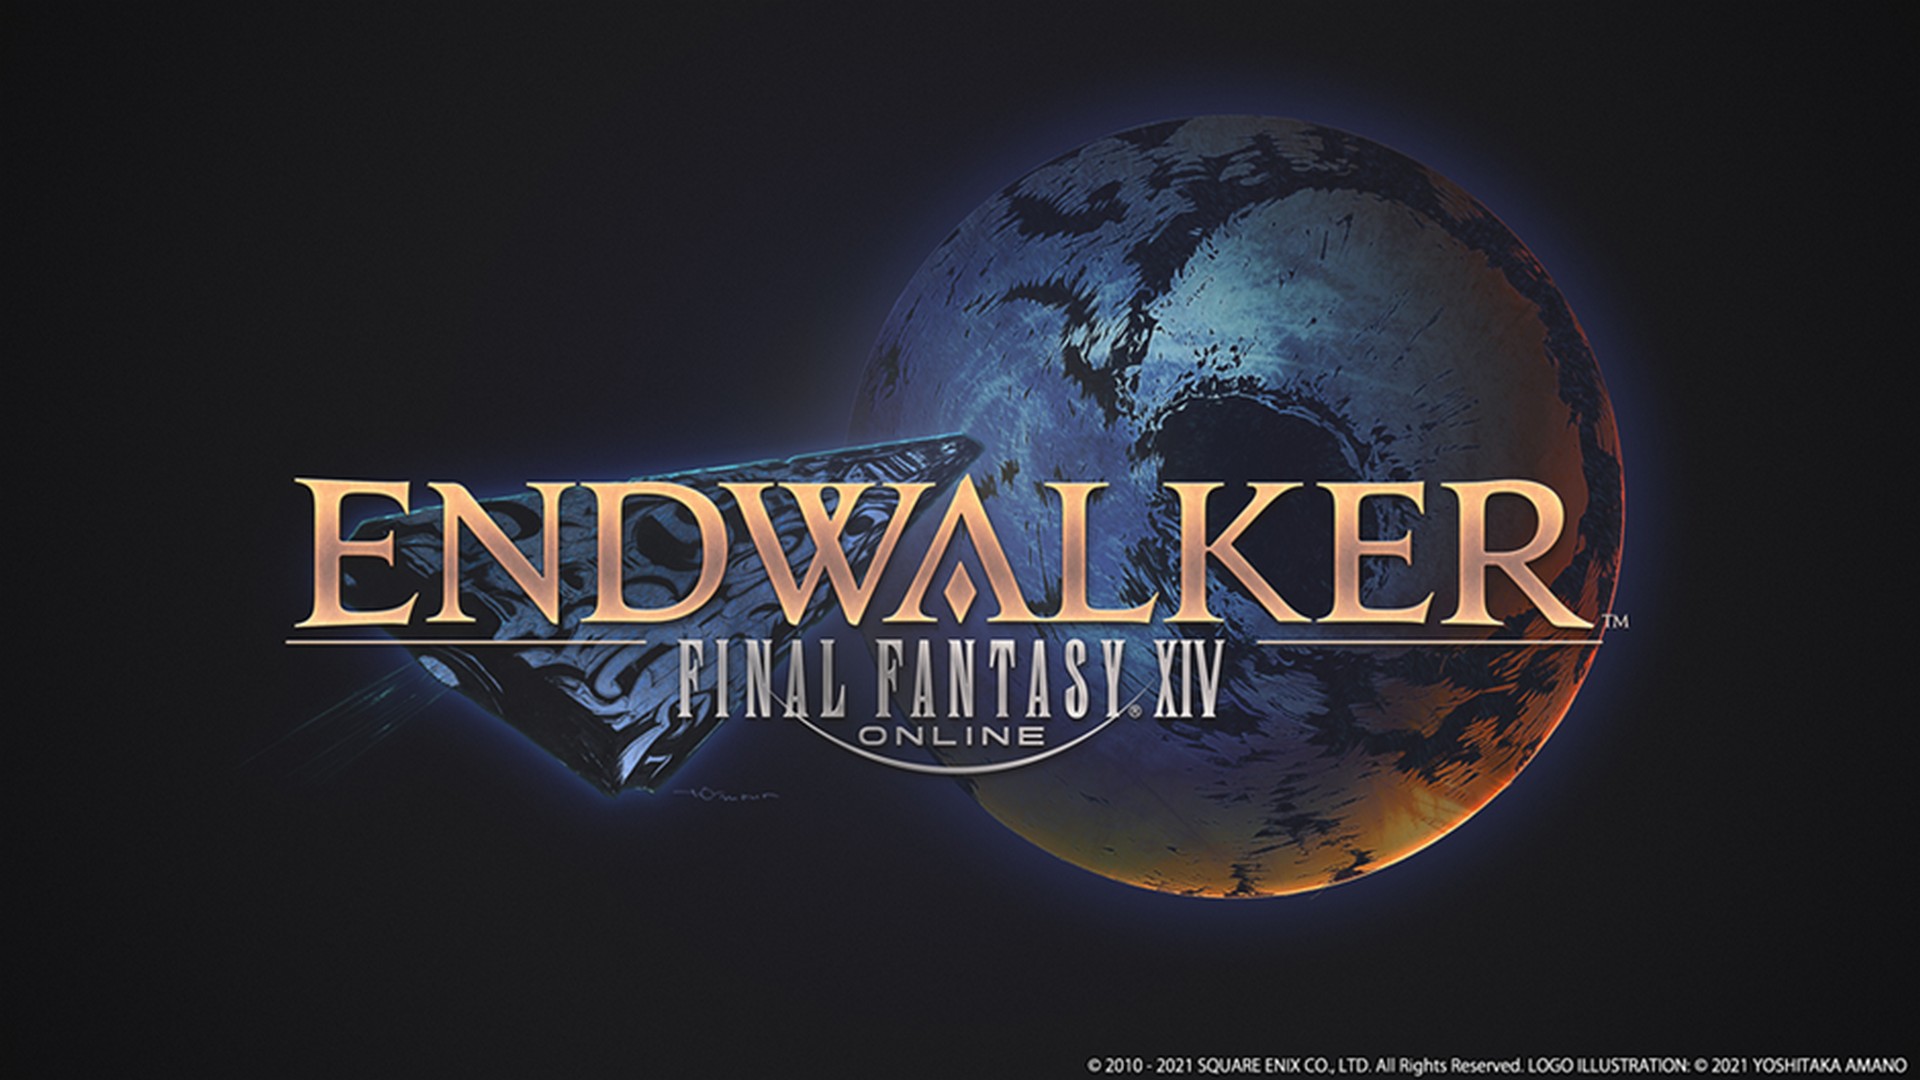 Final Fantasy XIV Online Announces Future Plans, Including Graphical Updates, Expanding Support For Solo Play & Upcoming Content Roadmap